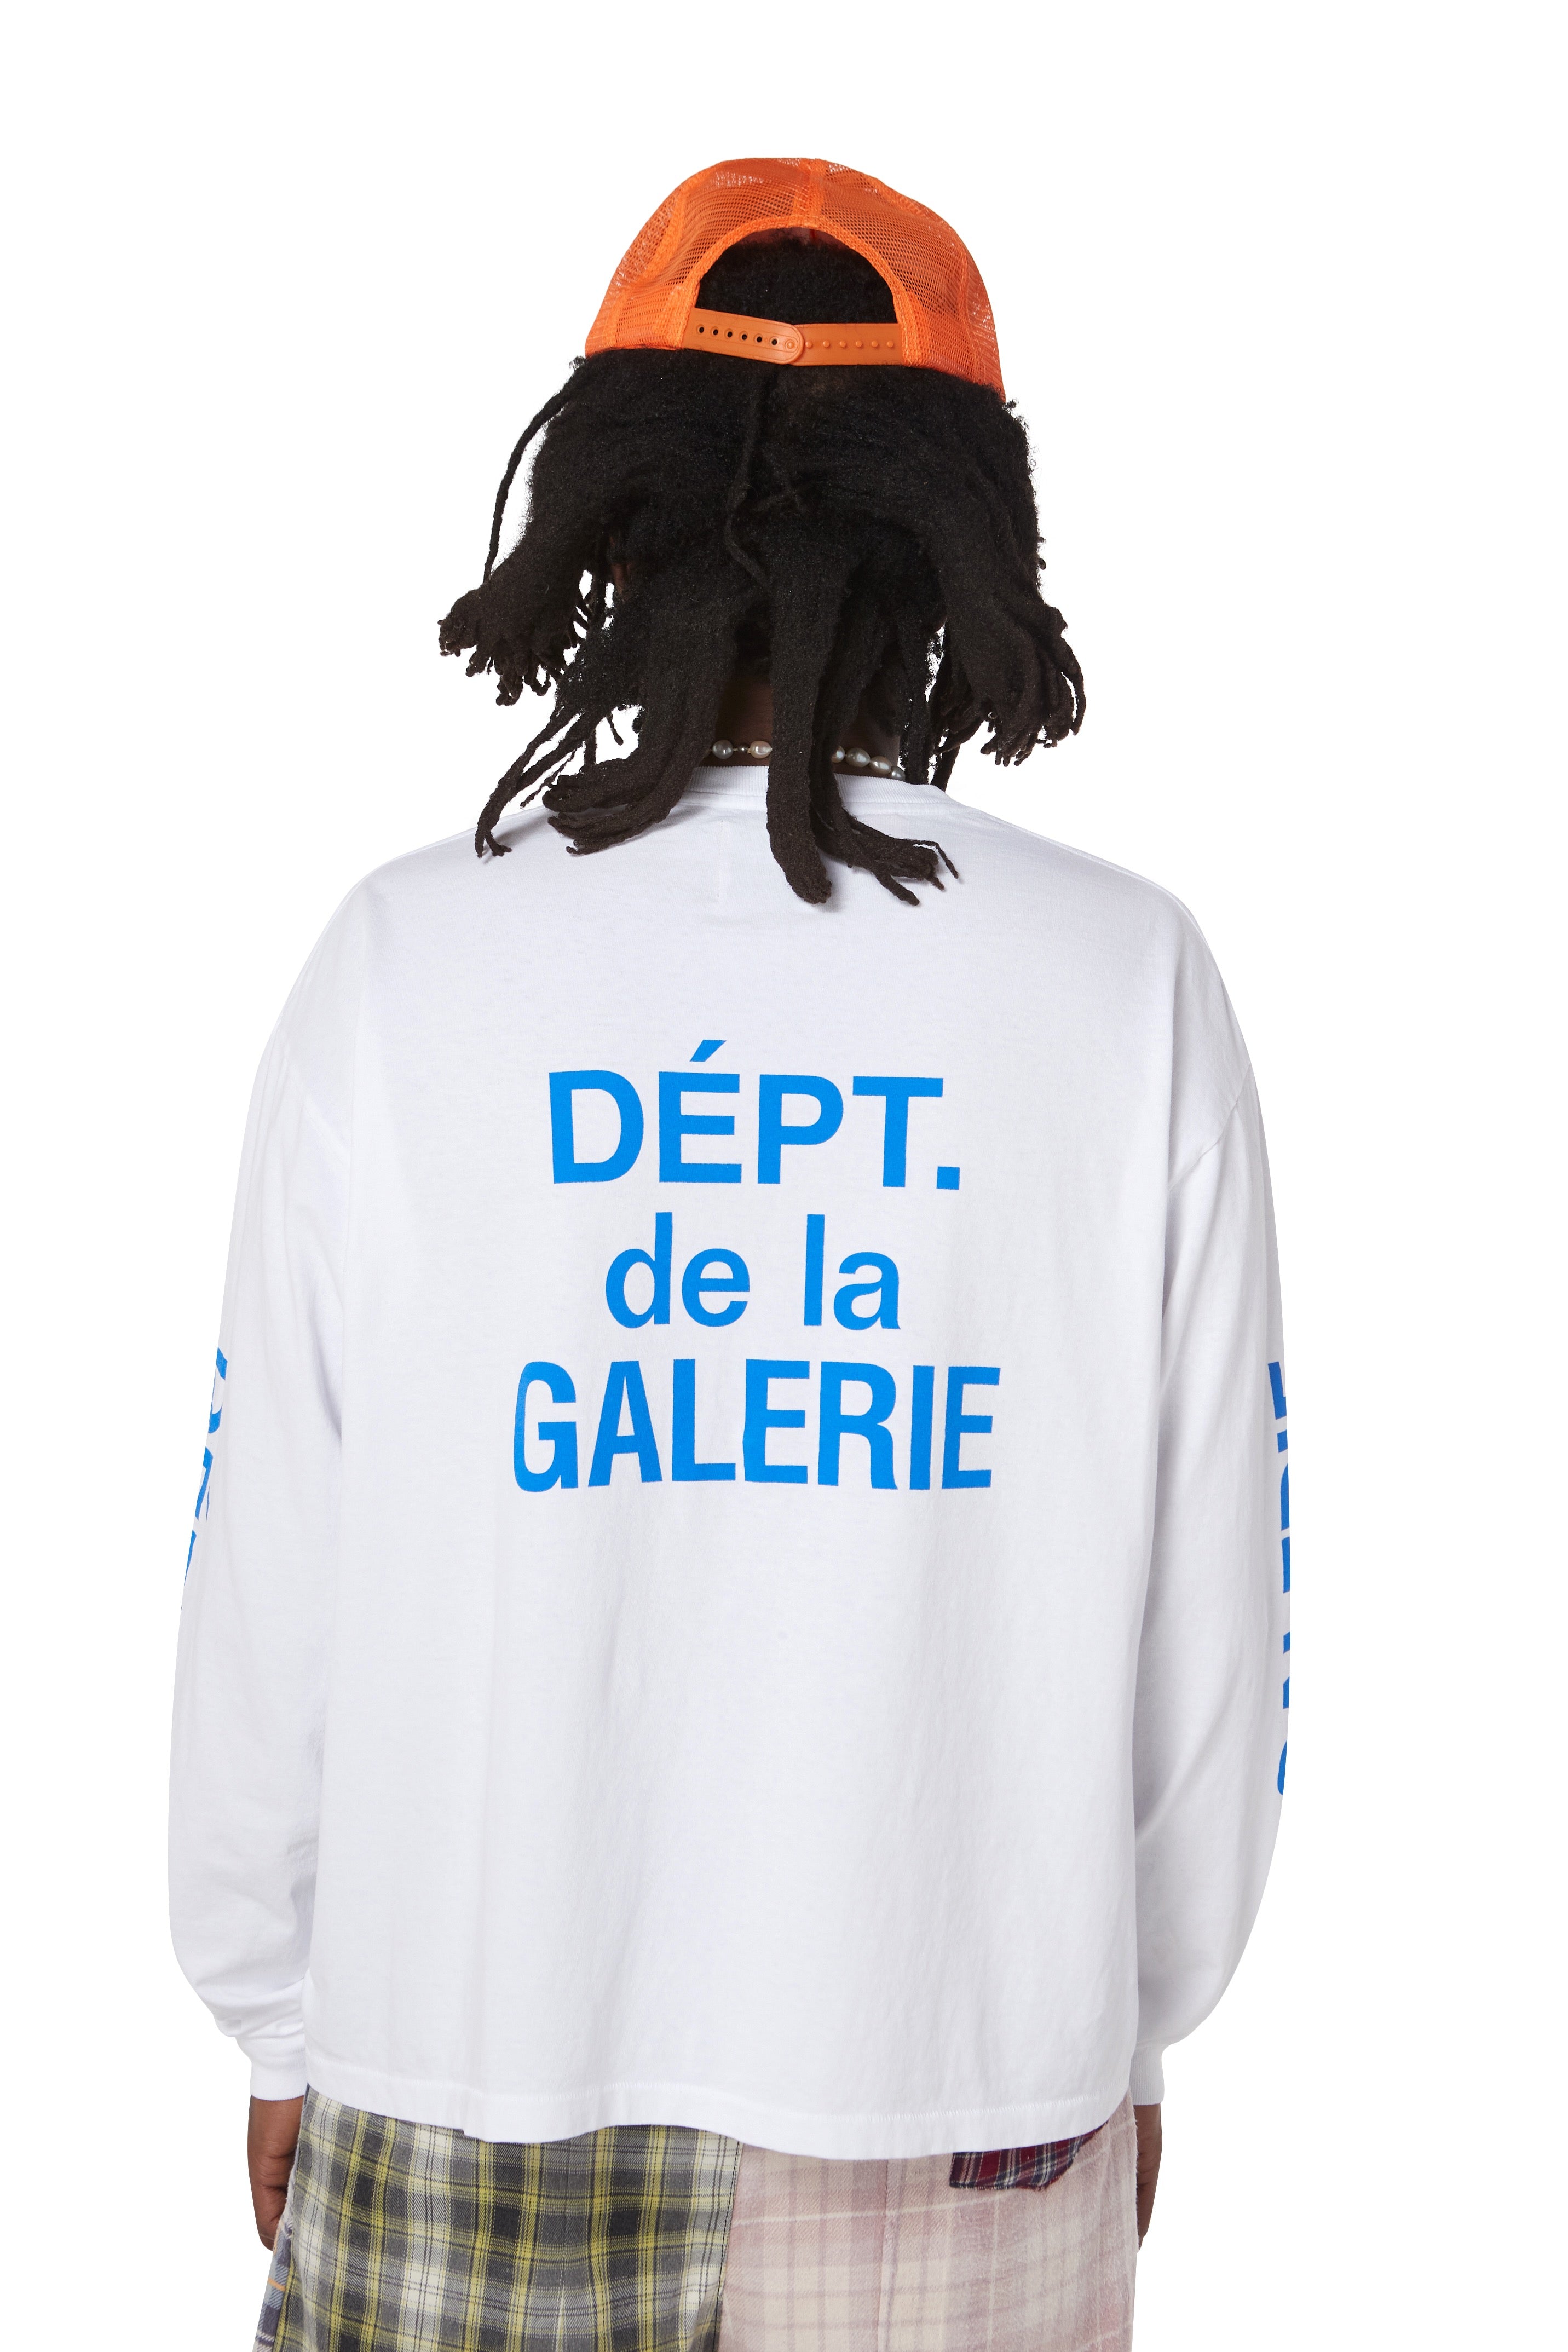 FRENCH COLLECTOR online – SLEEVE WHITE LONG Dept - T-SHIRT Gallery